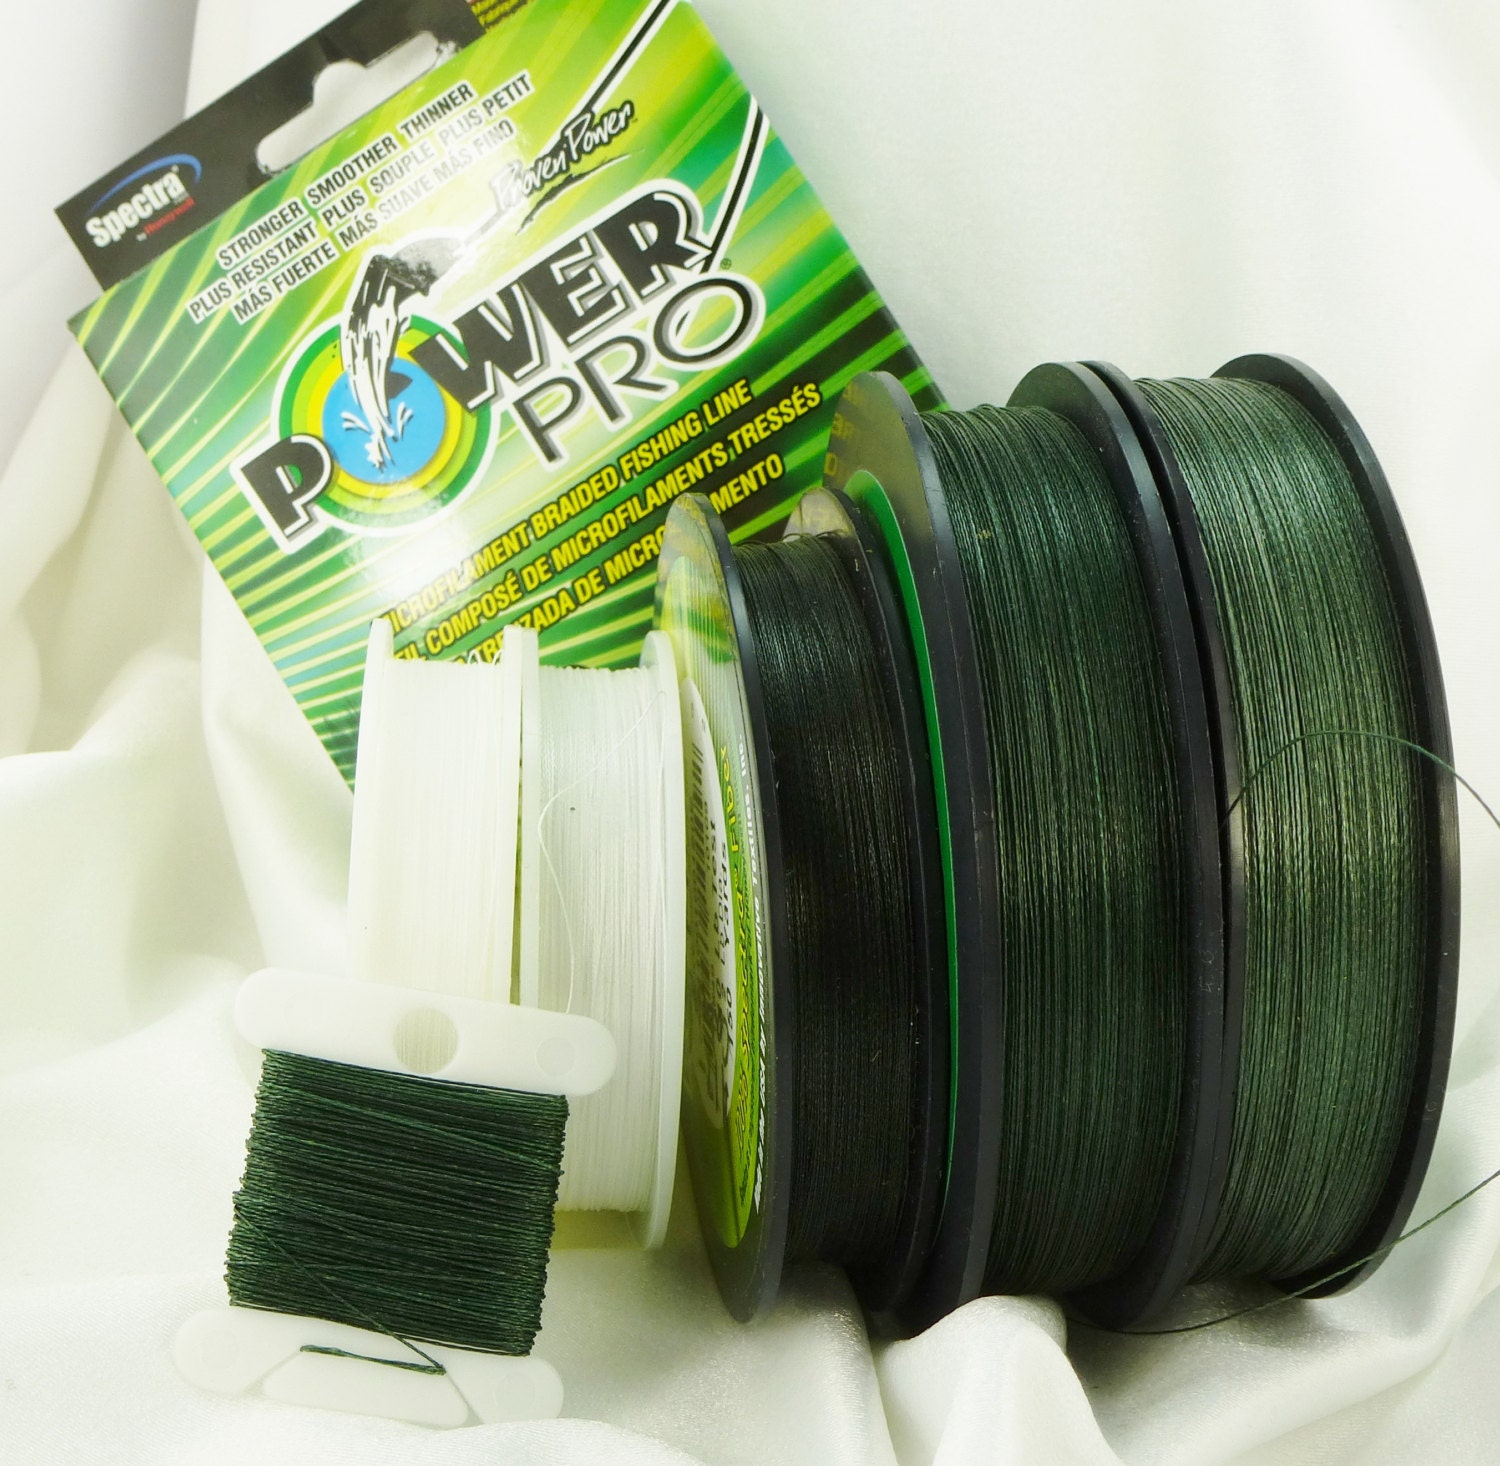 Power Pro Braided Beading Thread, White or Moss Green Fishing Line,  Knotting Cord, Powerpro 10, 20, 30, 40 Spectra Fiber, Made in USA 